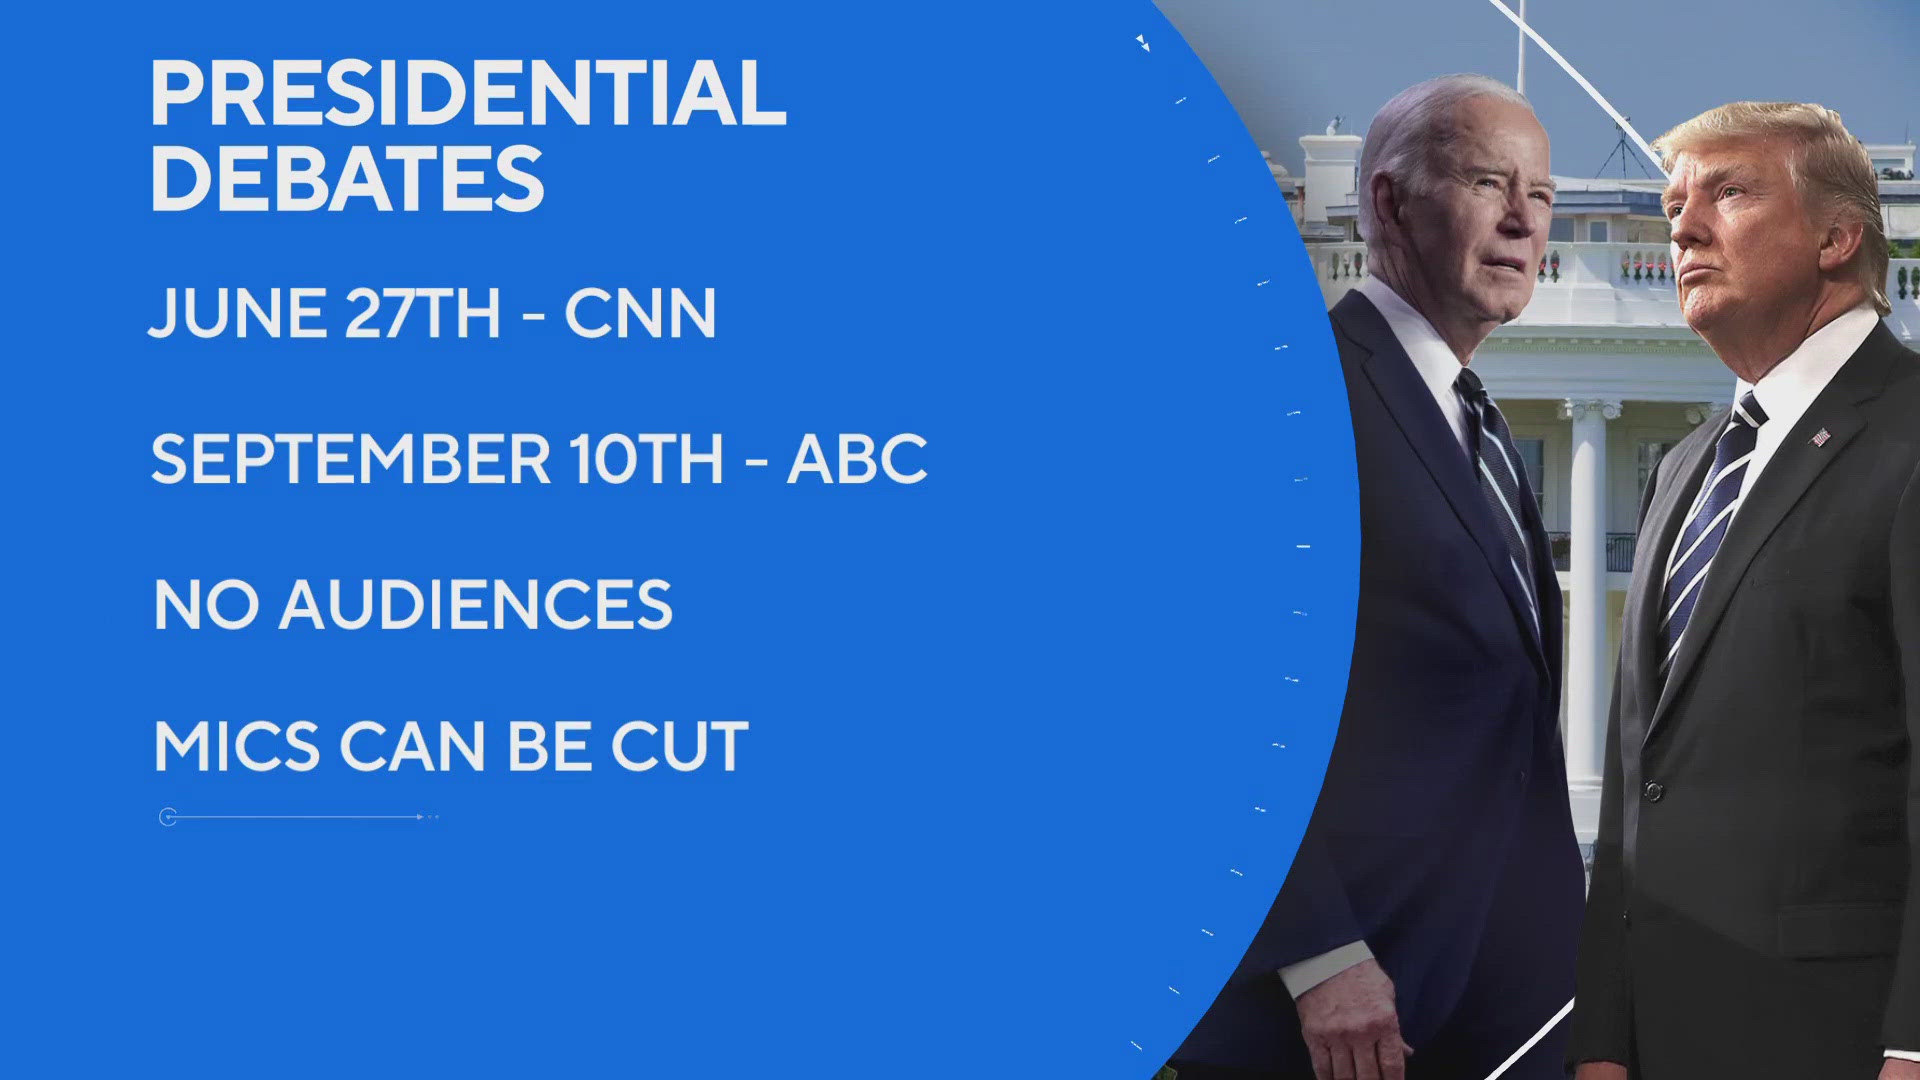 The first debate is set for June 27 hosted by CNN in Atlanta.